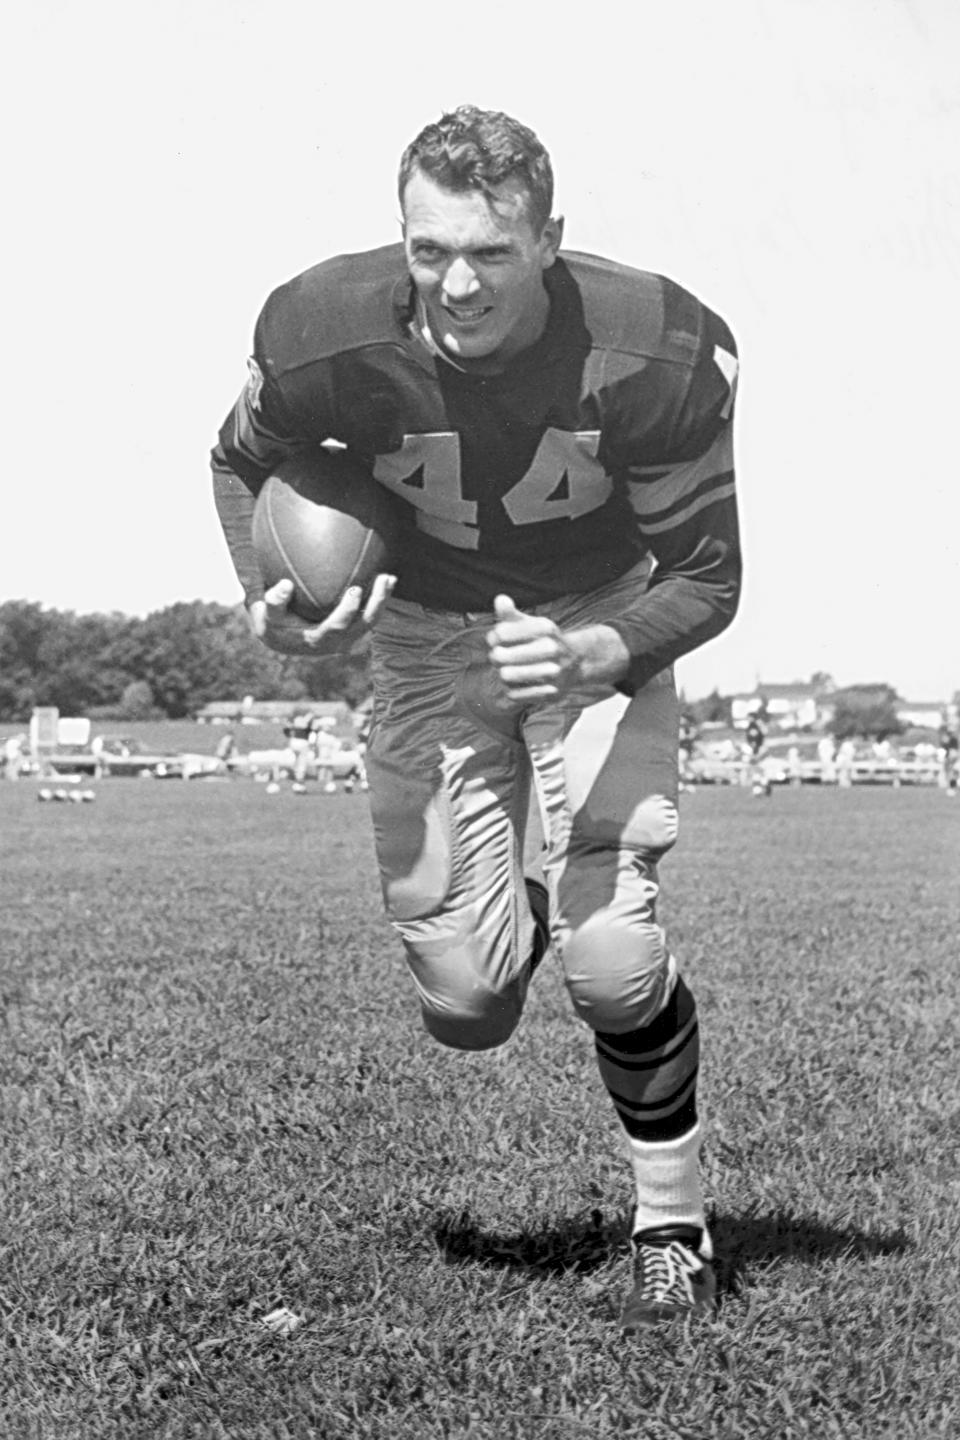 This 1950s era photo provided by the Green Bay Packers shows Bobby Dillon. Dillon initially planned to retire after the ’58 season for the simple reason he could make more money working for Wilsonart, a countertop company for which he eventually became the CEO. But Vince Lombardi took charge as Packers coach in 1959 and asked Dillon to return, calling him the NFL’s best defensive back. Dillon passed away at age 89 in August 2019, five months before he was selected for the Hall of Fame as part of the centennial class. (Green Bay Packers via AP)